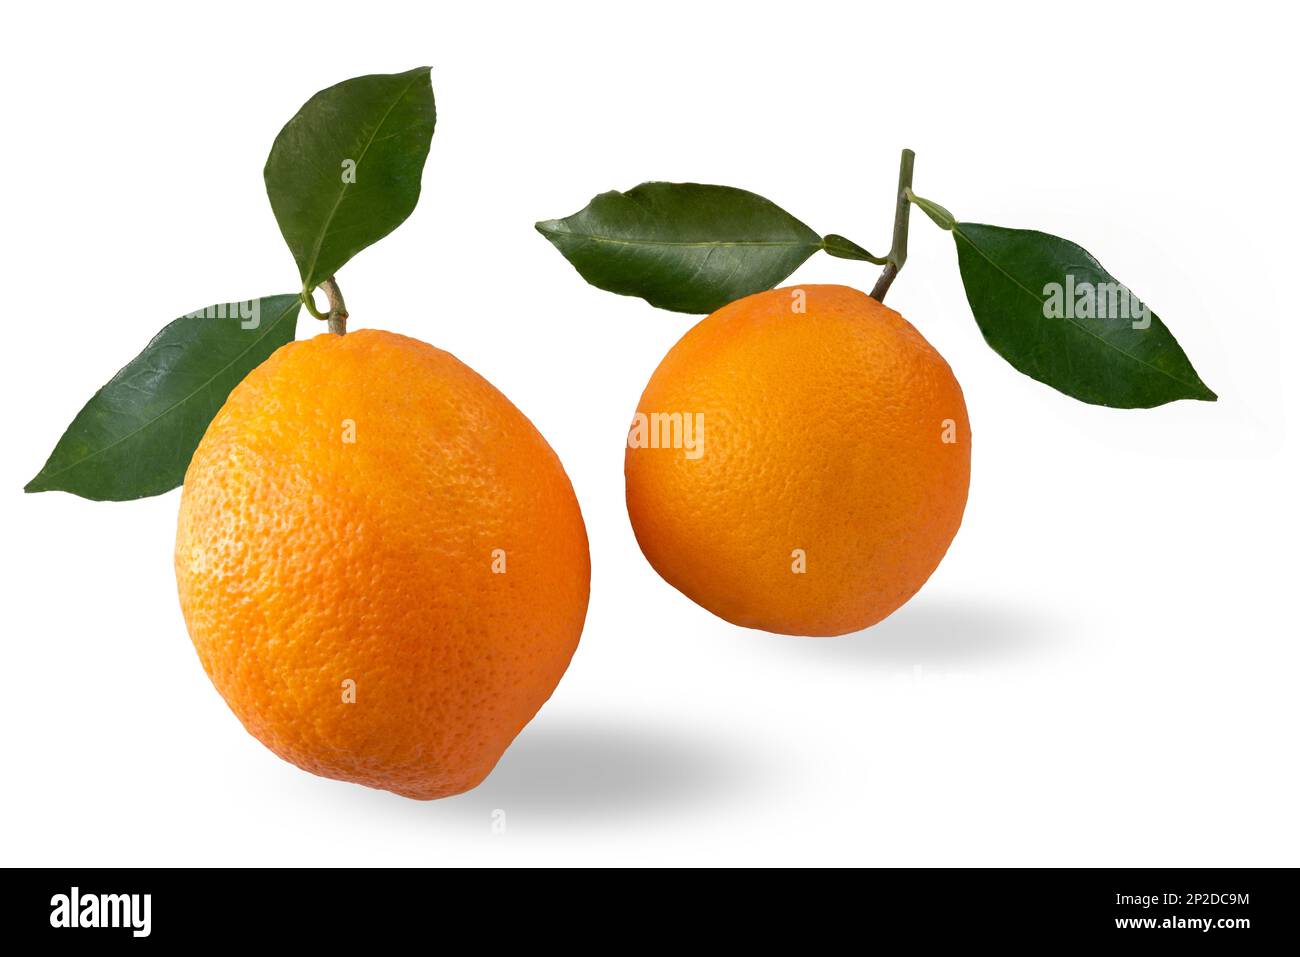 Oranges with green leaves isolated on white with clipping path included Stock Photo